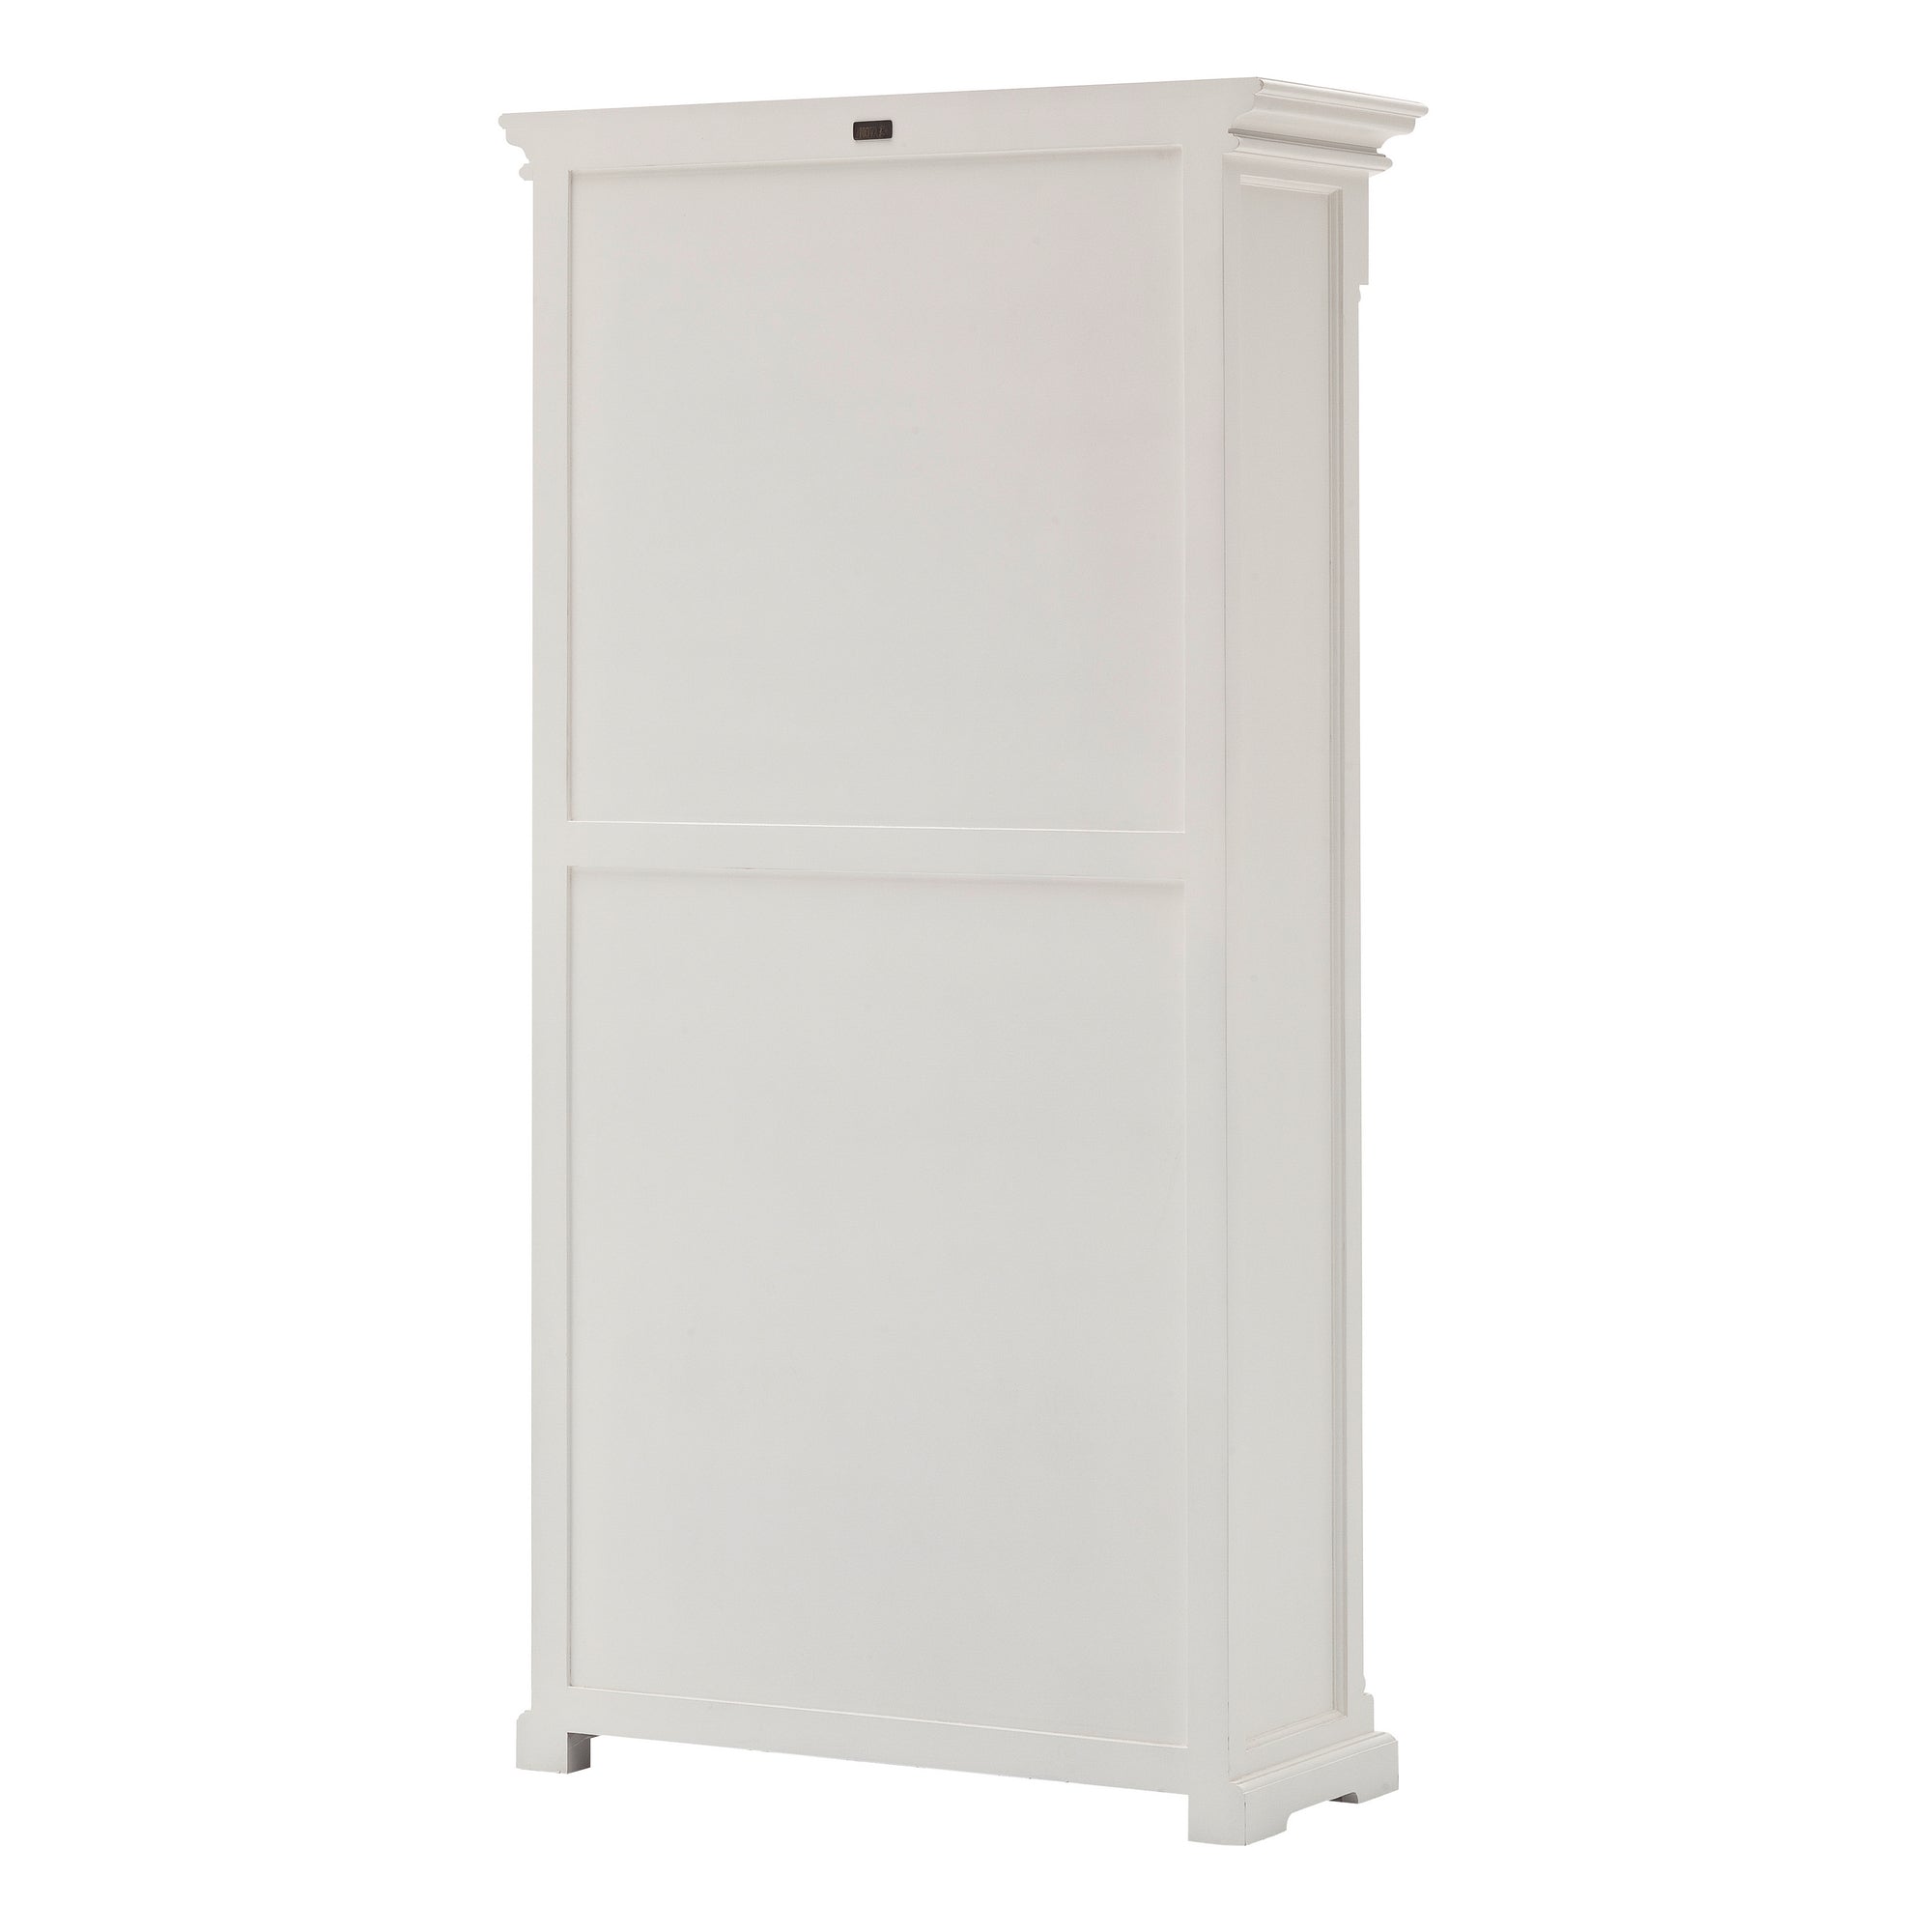 Provence Timber 2 Drawer Bookcase - Classic White - Notbrand